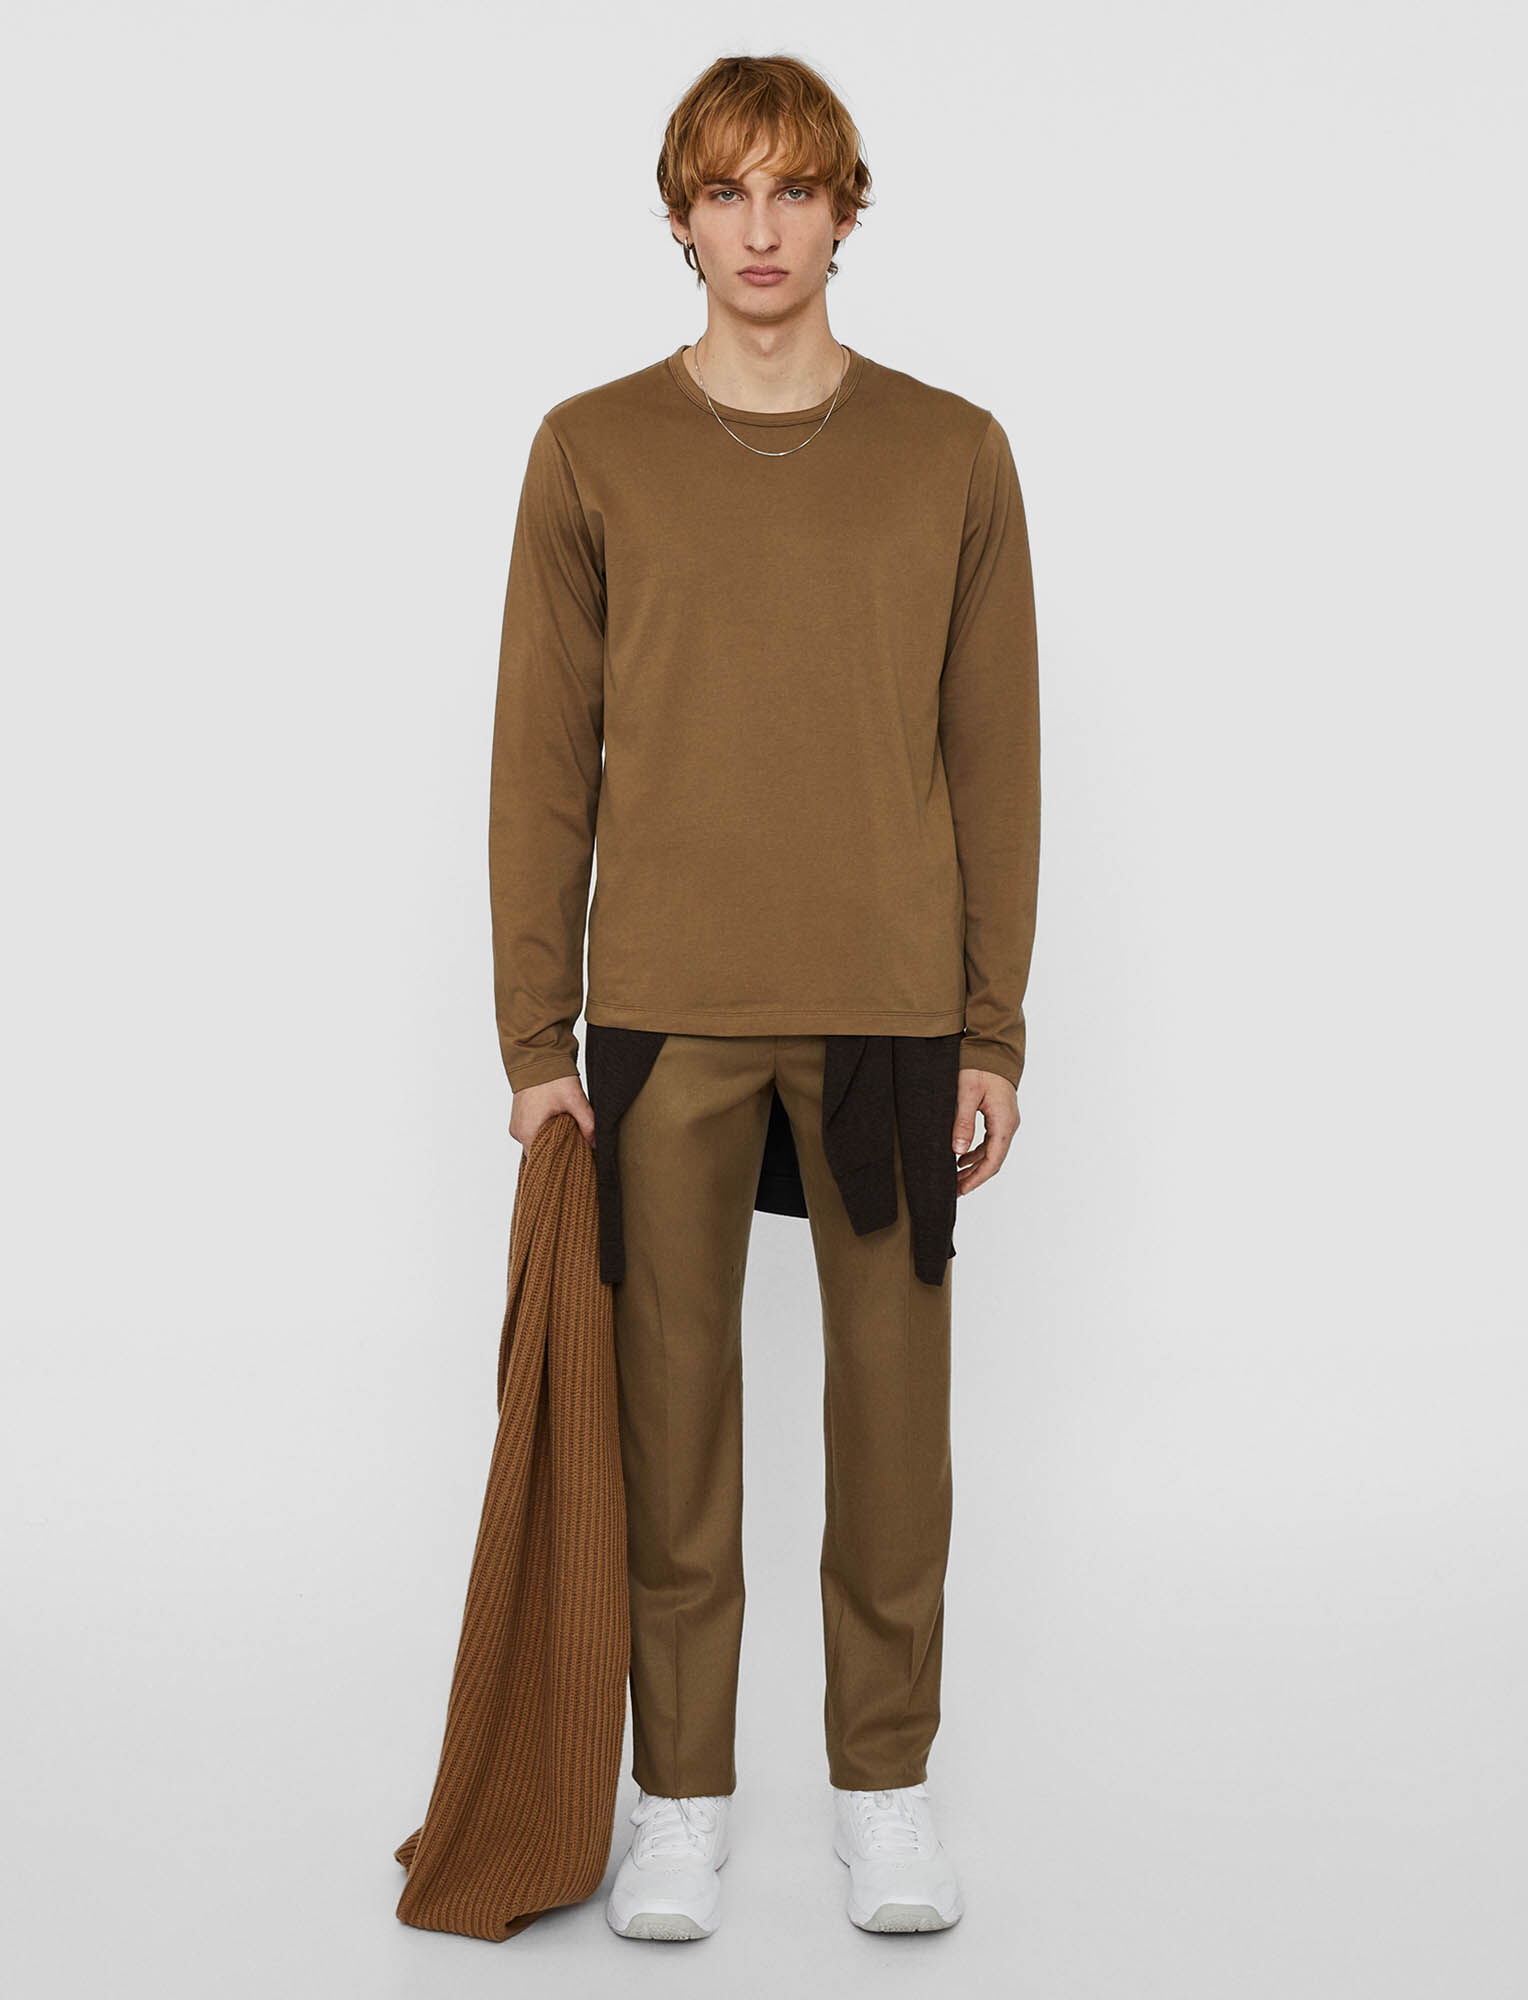 Joseph, Suvin Soft Jersey Top, in Camel